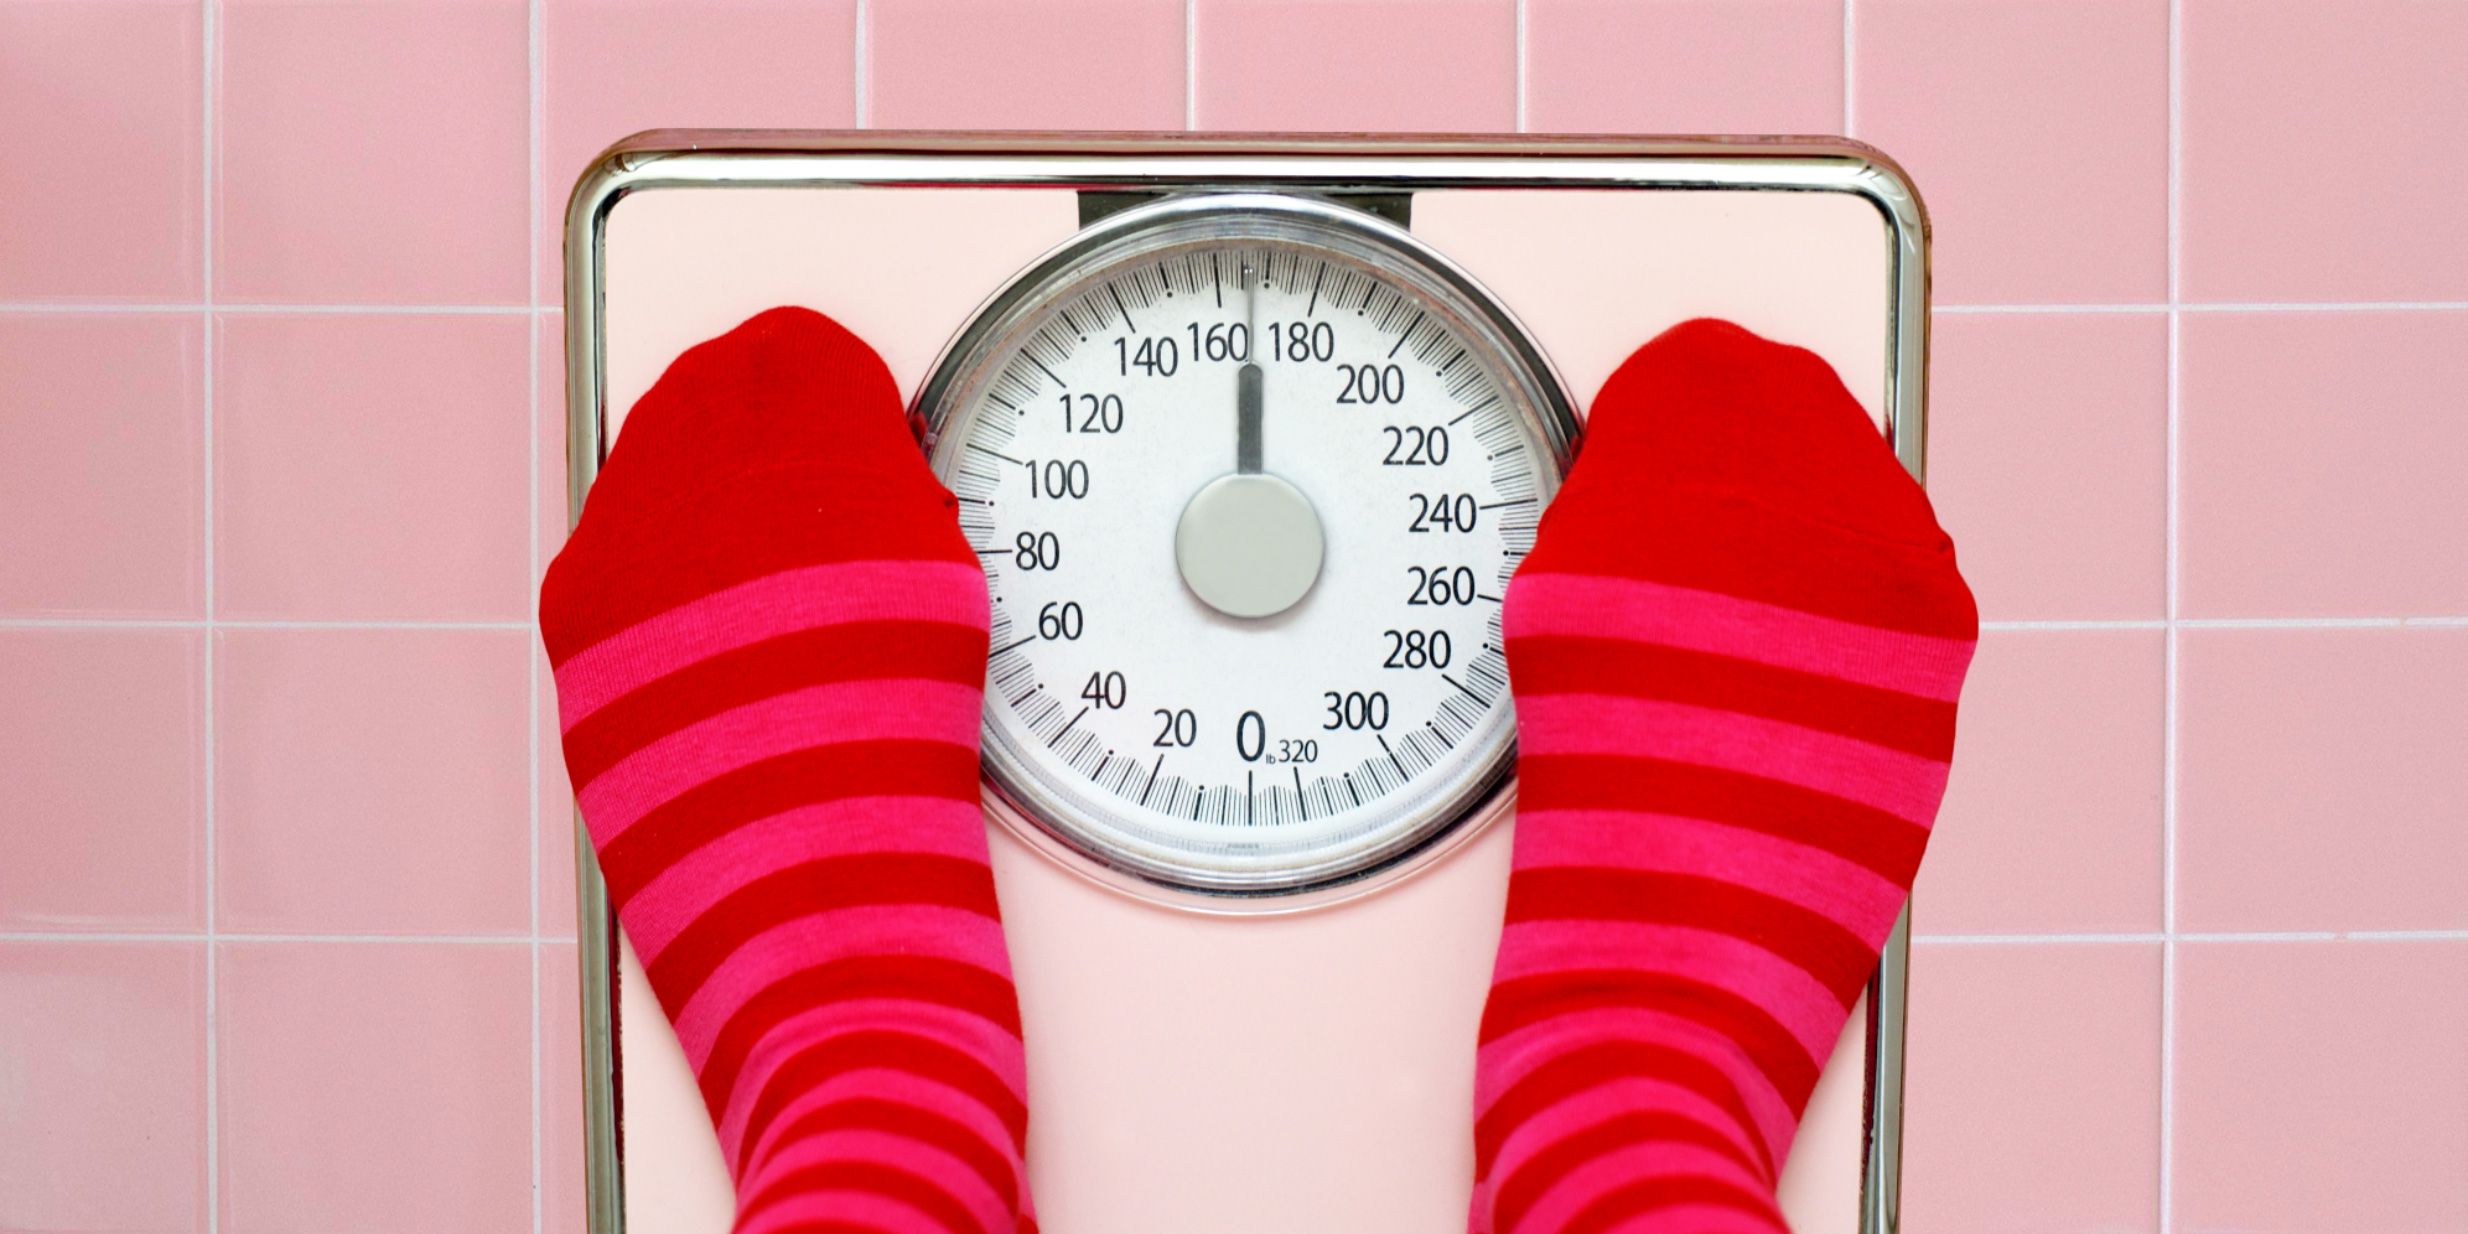 How To Make Your Weight Lighter On A Scale